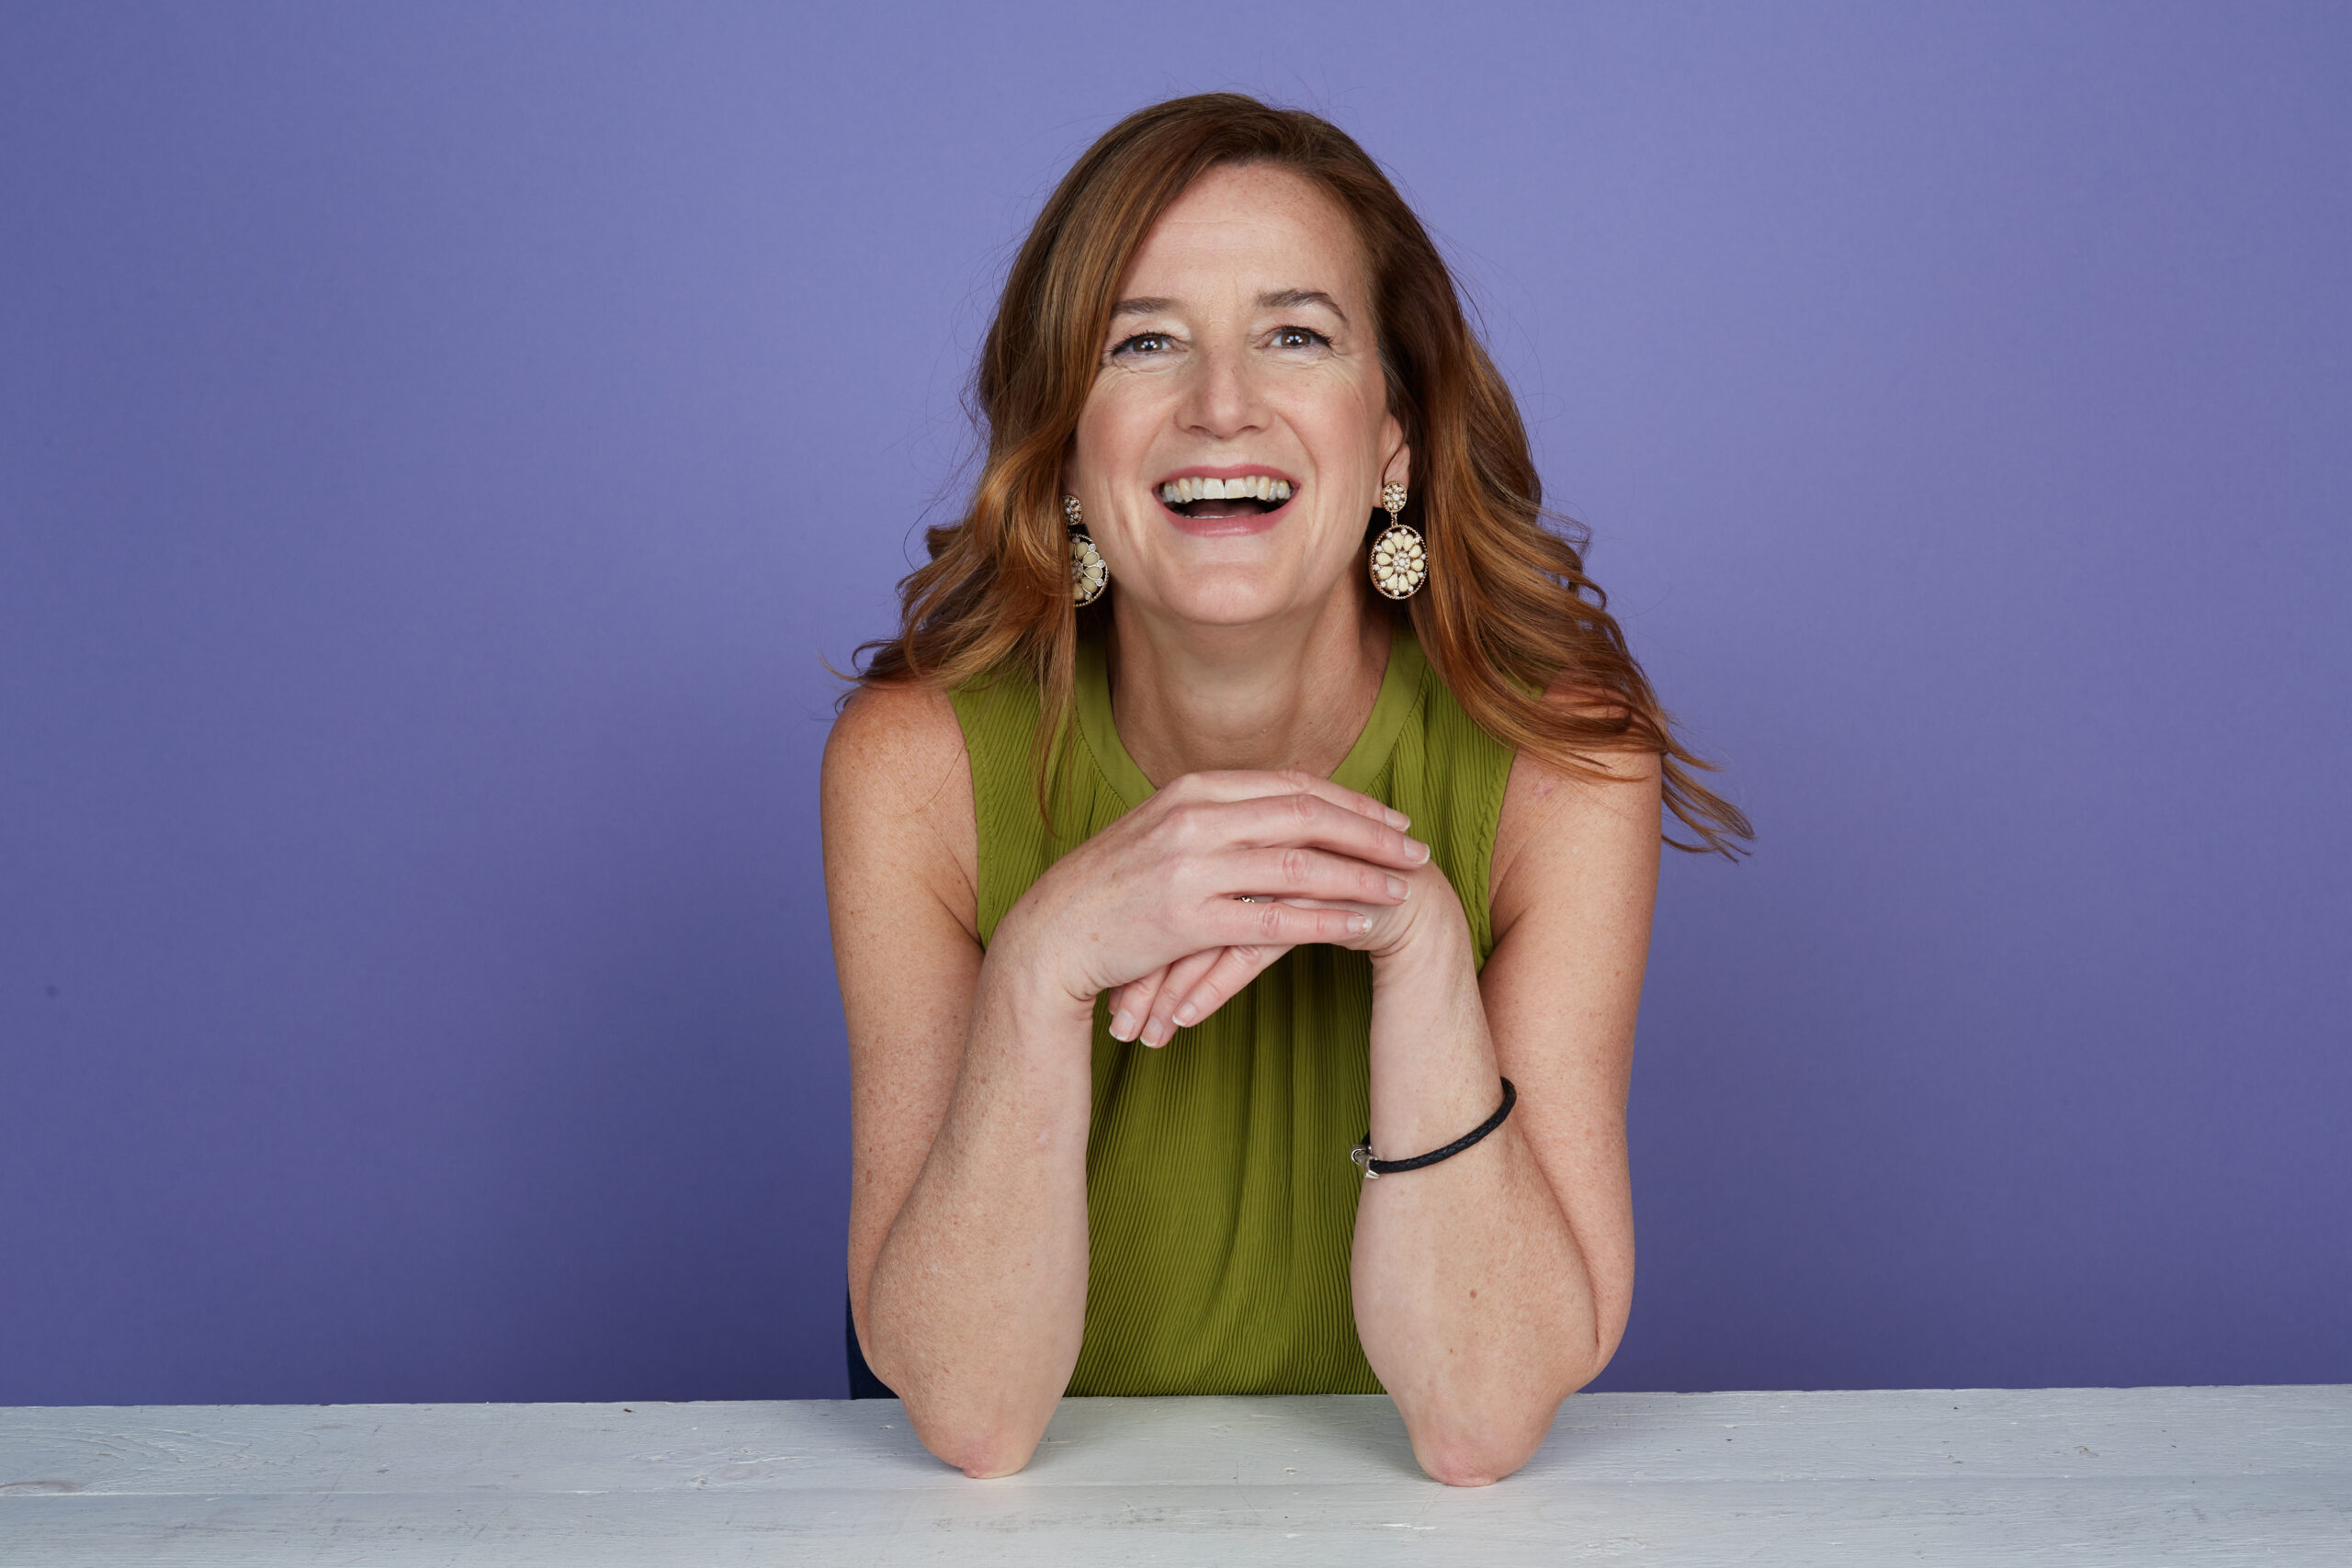 Annie Gaudreault, a woman with long red hair, wearing a green sleeveless top, smiles while leaning on a white table against a purple background.